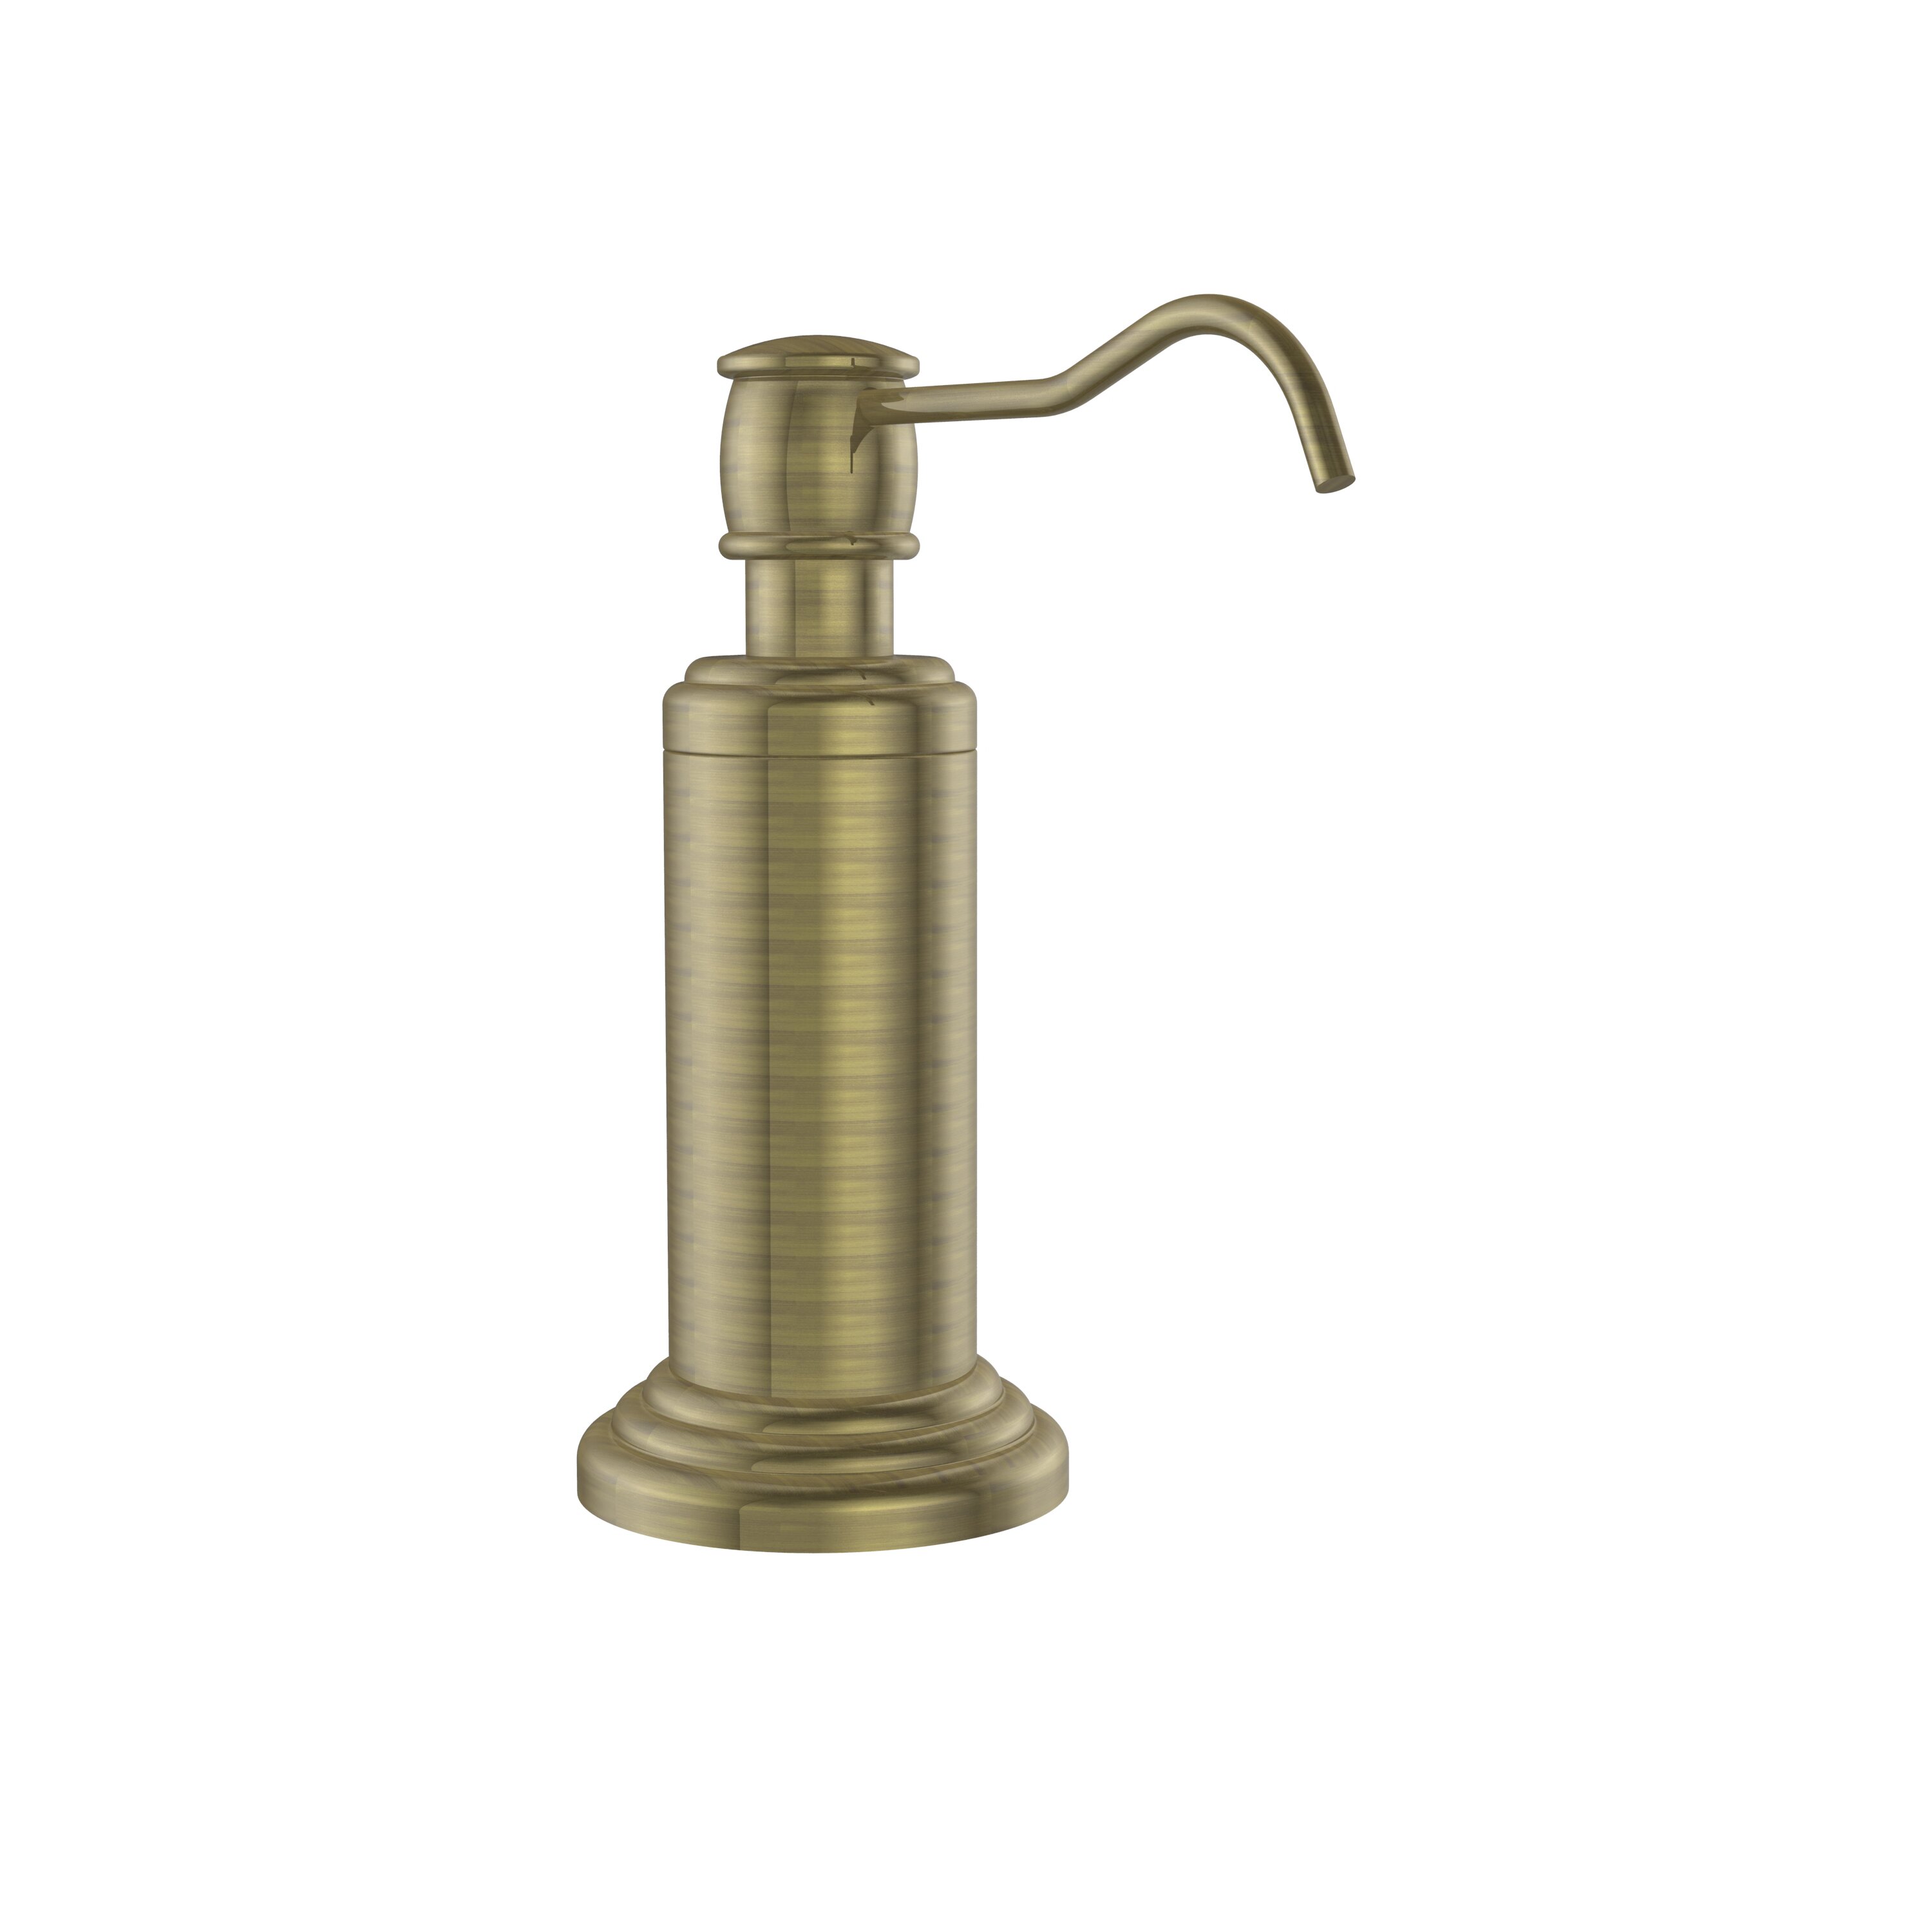 Allied Brass Waverly Place Free Standing Soap Dispenser & Reviews ... - Allied Brass Waverly Place Free Standing Soap Dispenser